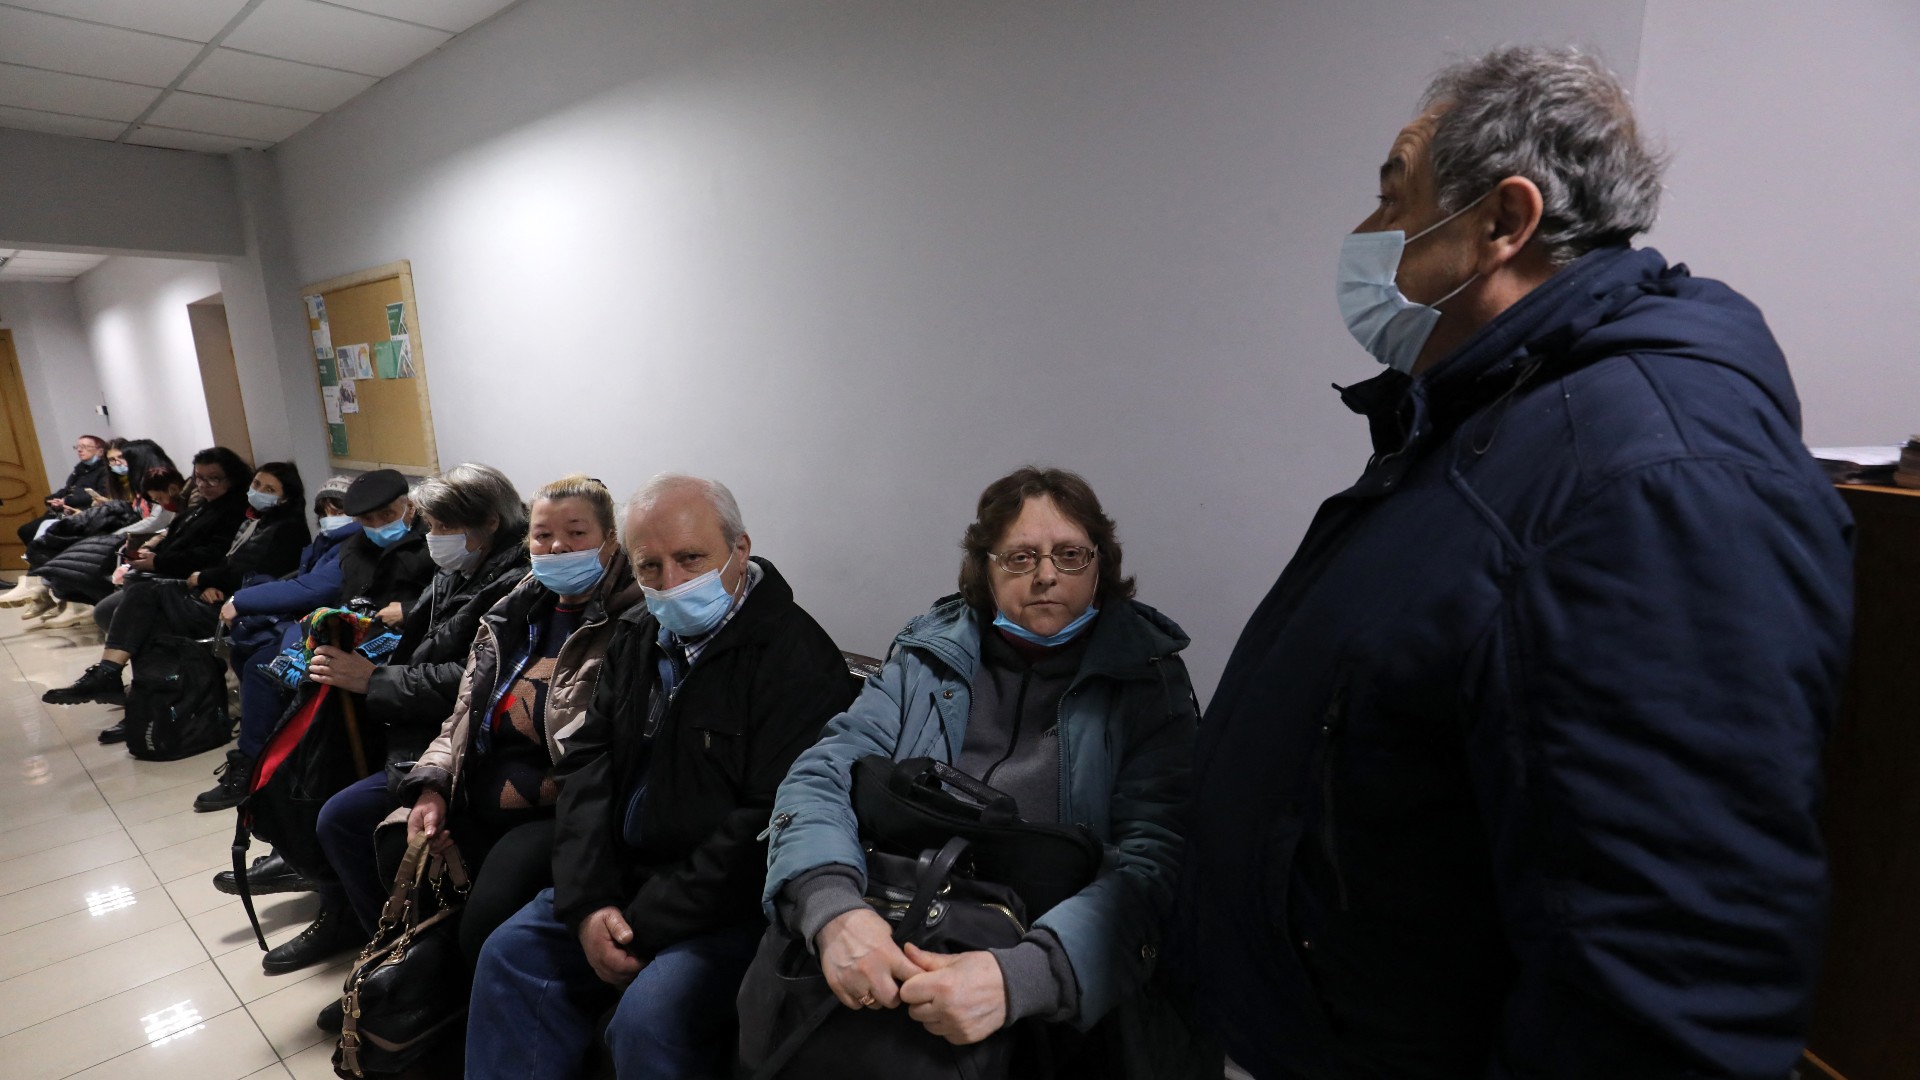 Ukrainian Jewish refugees who fled the war in their country, wait at the Israeli consulate in the Moldovan capital capital Chisinau (Kishinev), to register to leave to Israel, on March 16, 2022.